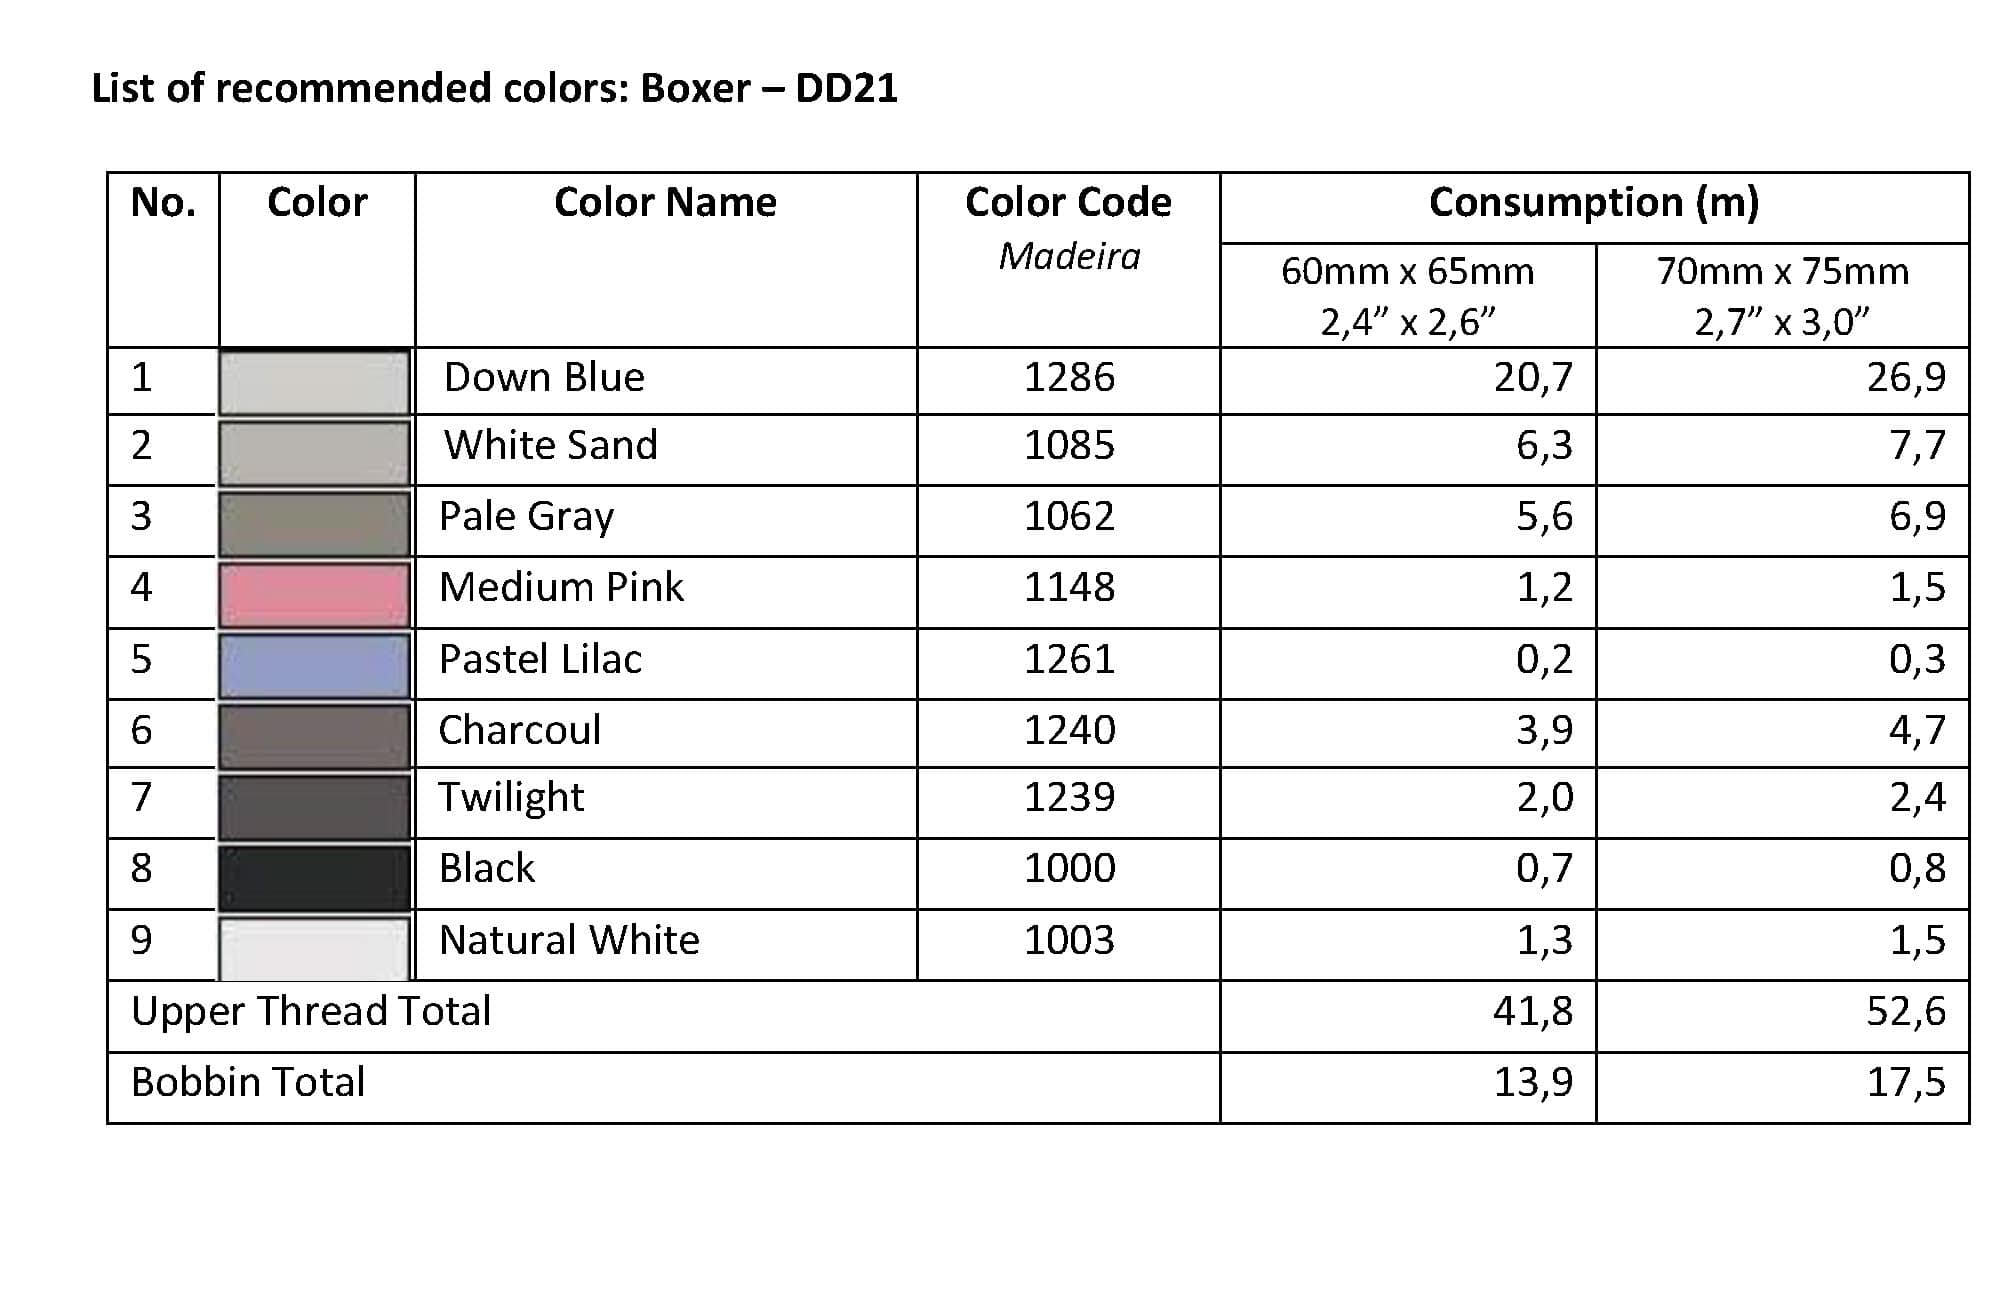 List of Recommended Colors - Boxer DD21